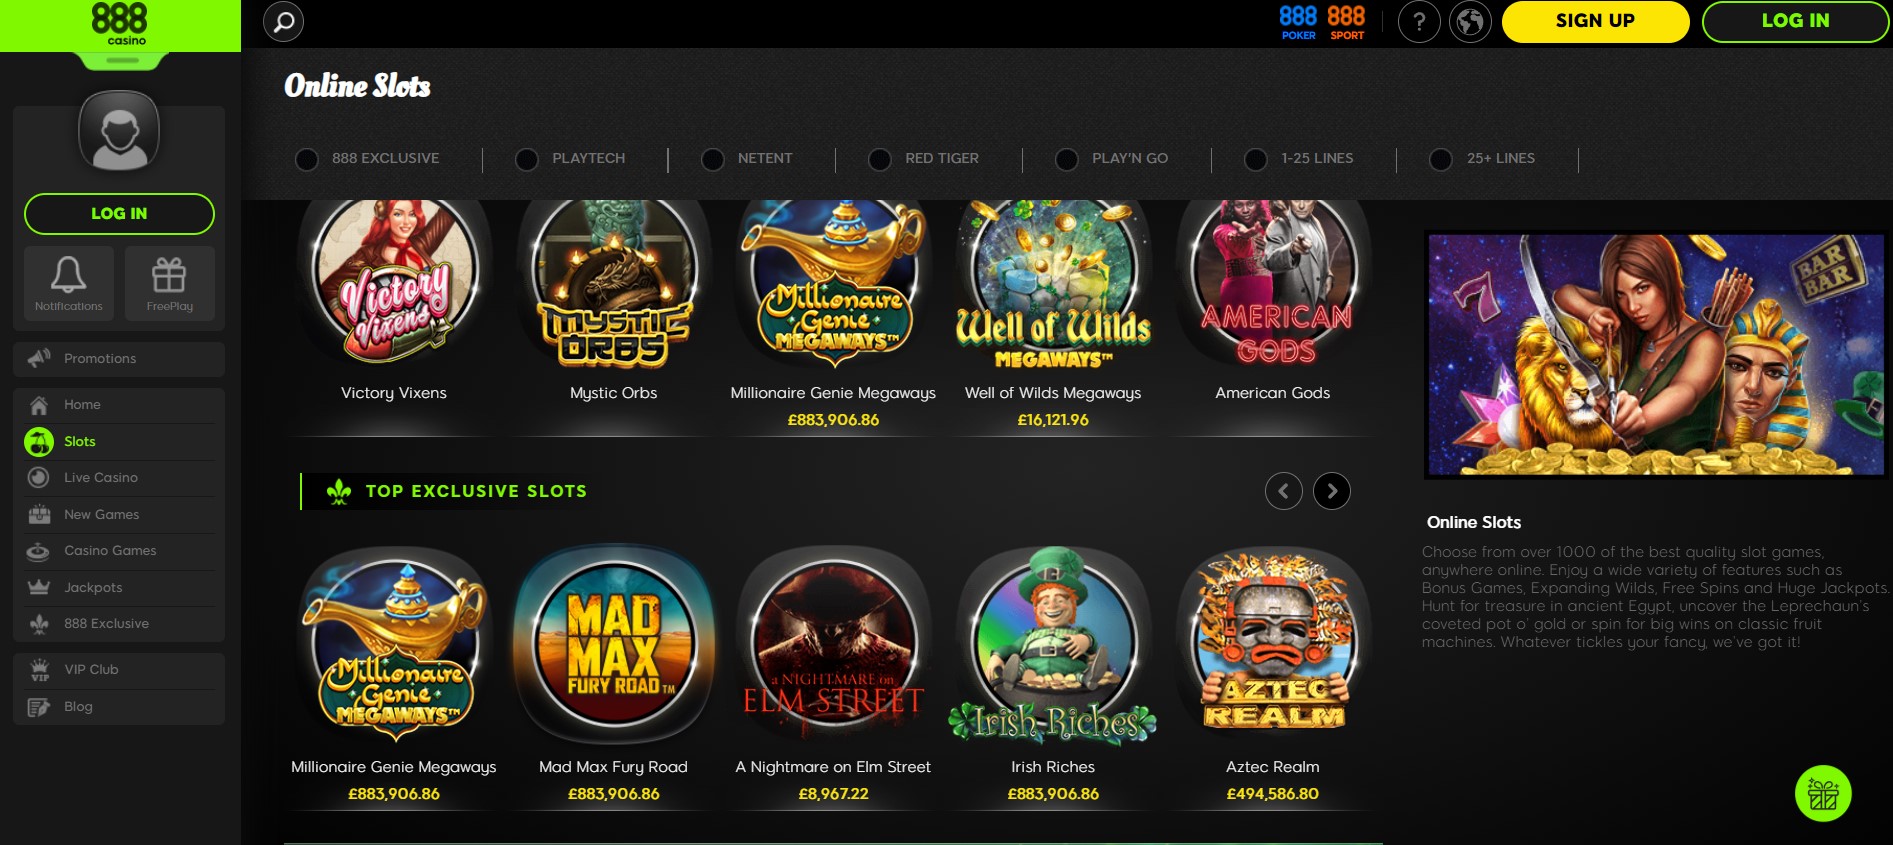 888casino - one of the world’s leading online casinos